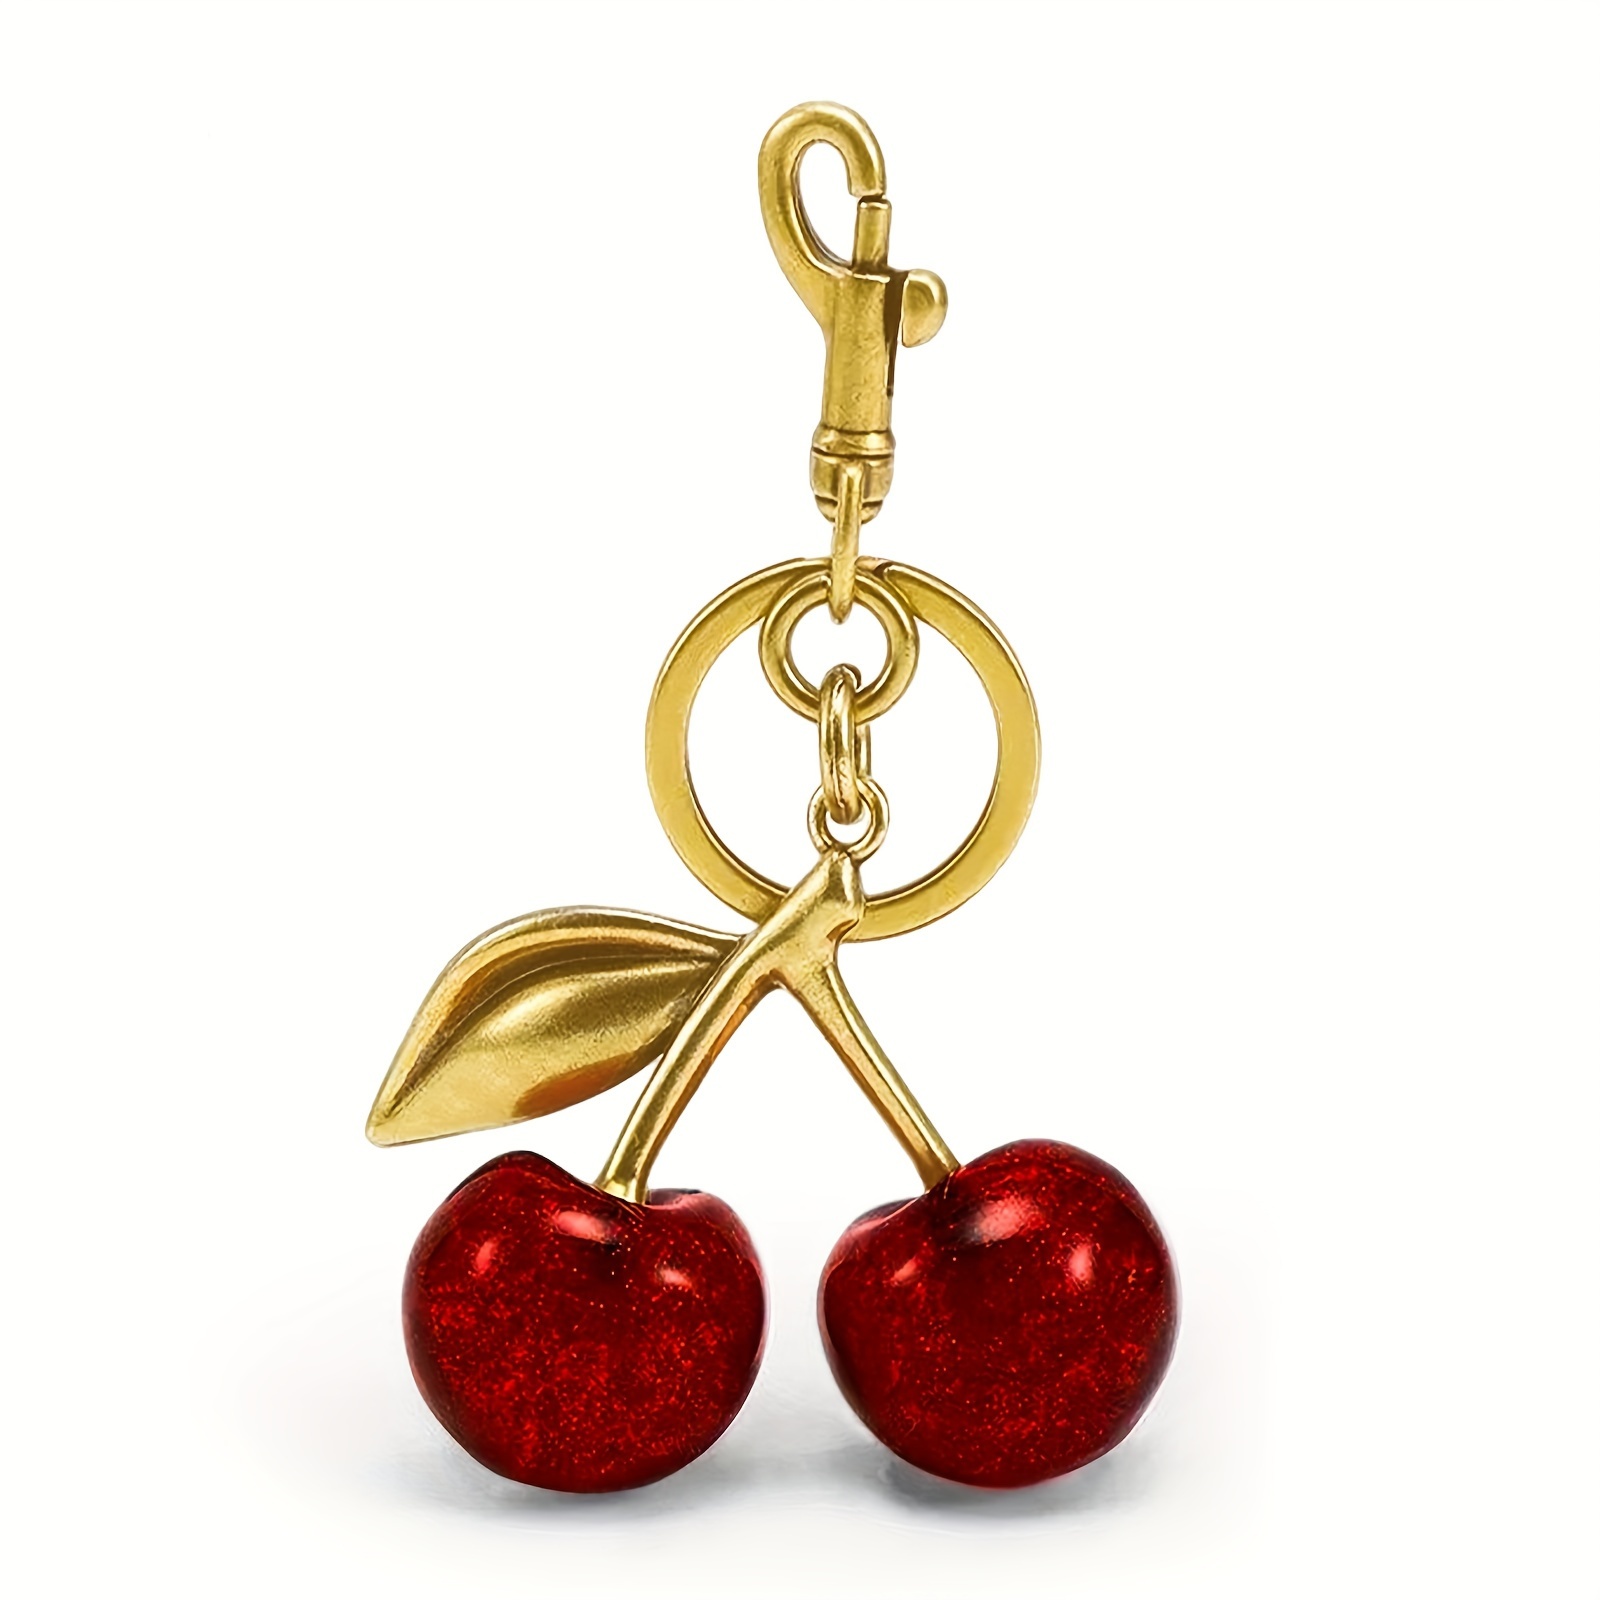 

Glitter Cherry Charm Keychain With Clip For Bag, Sparkling Resin & Metal Accessory For Purses And Bags For Women